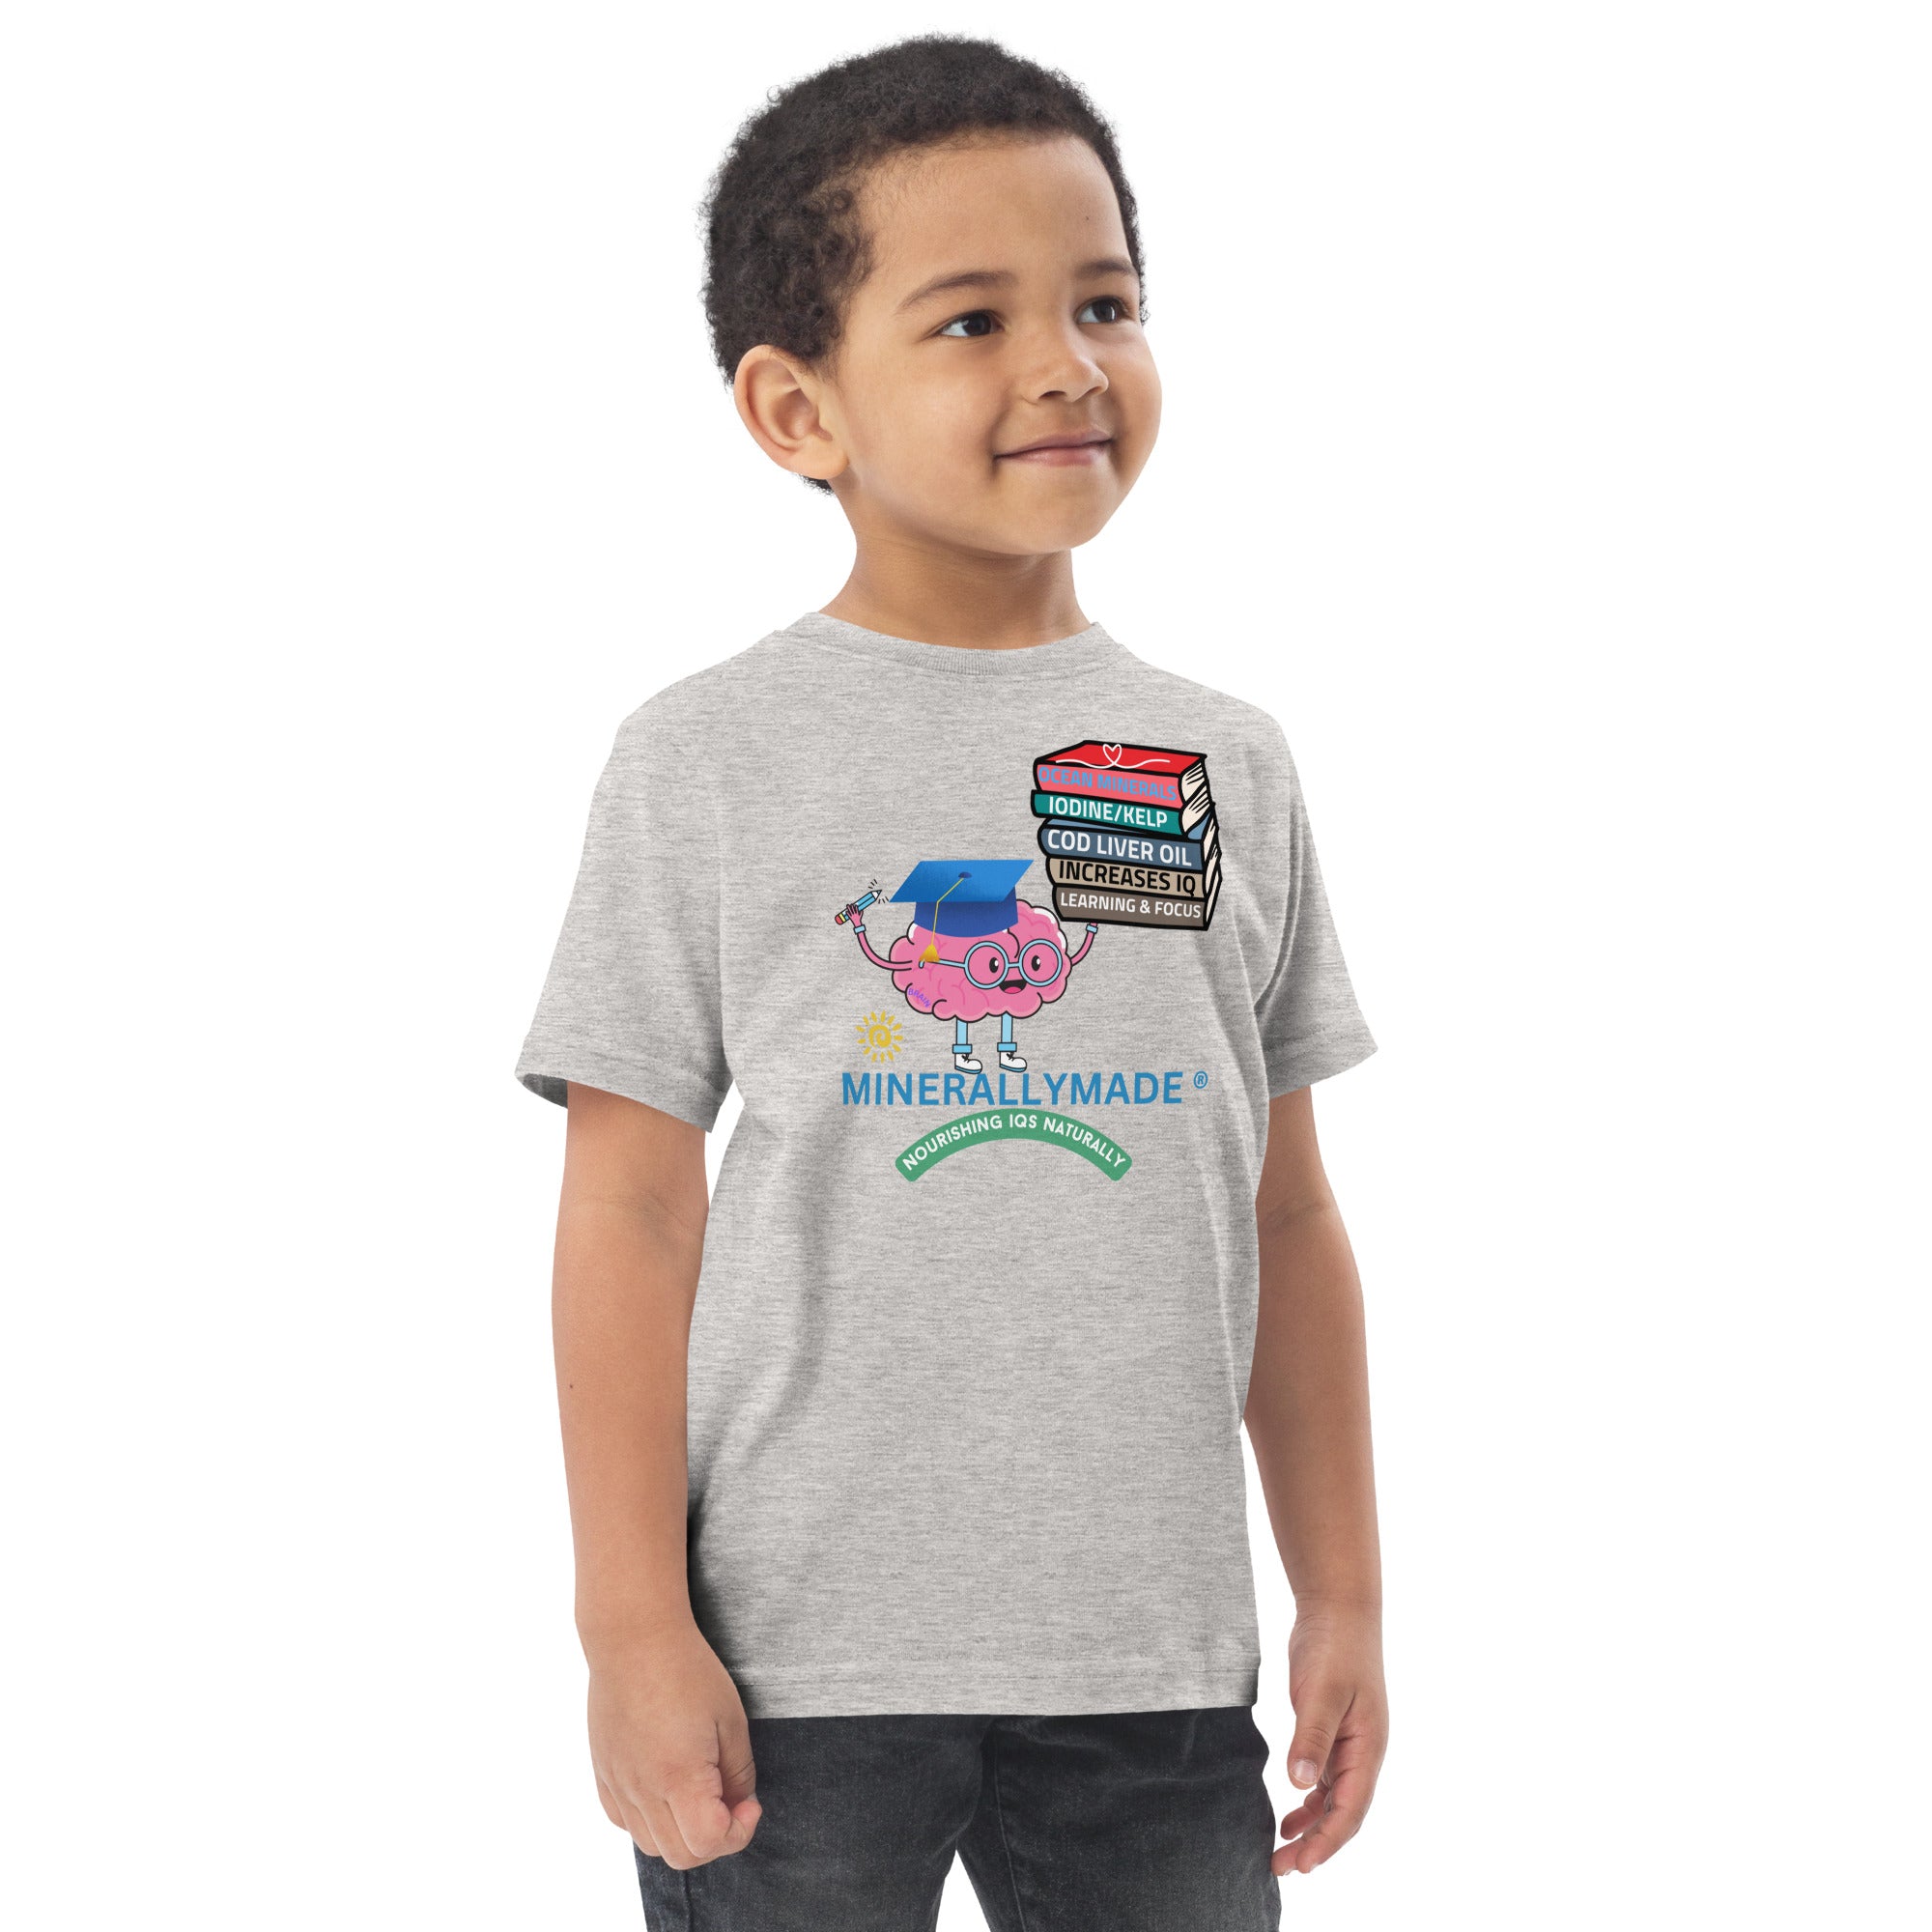 Minerallymade | Toddler Jersey T-shirt | 90-100% combed ring-spun cotton